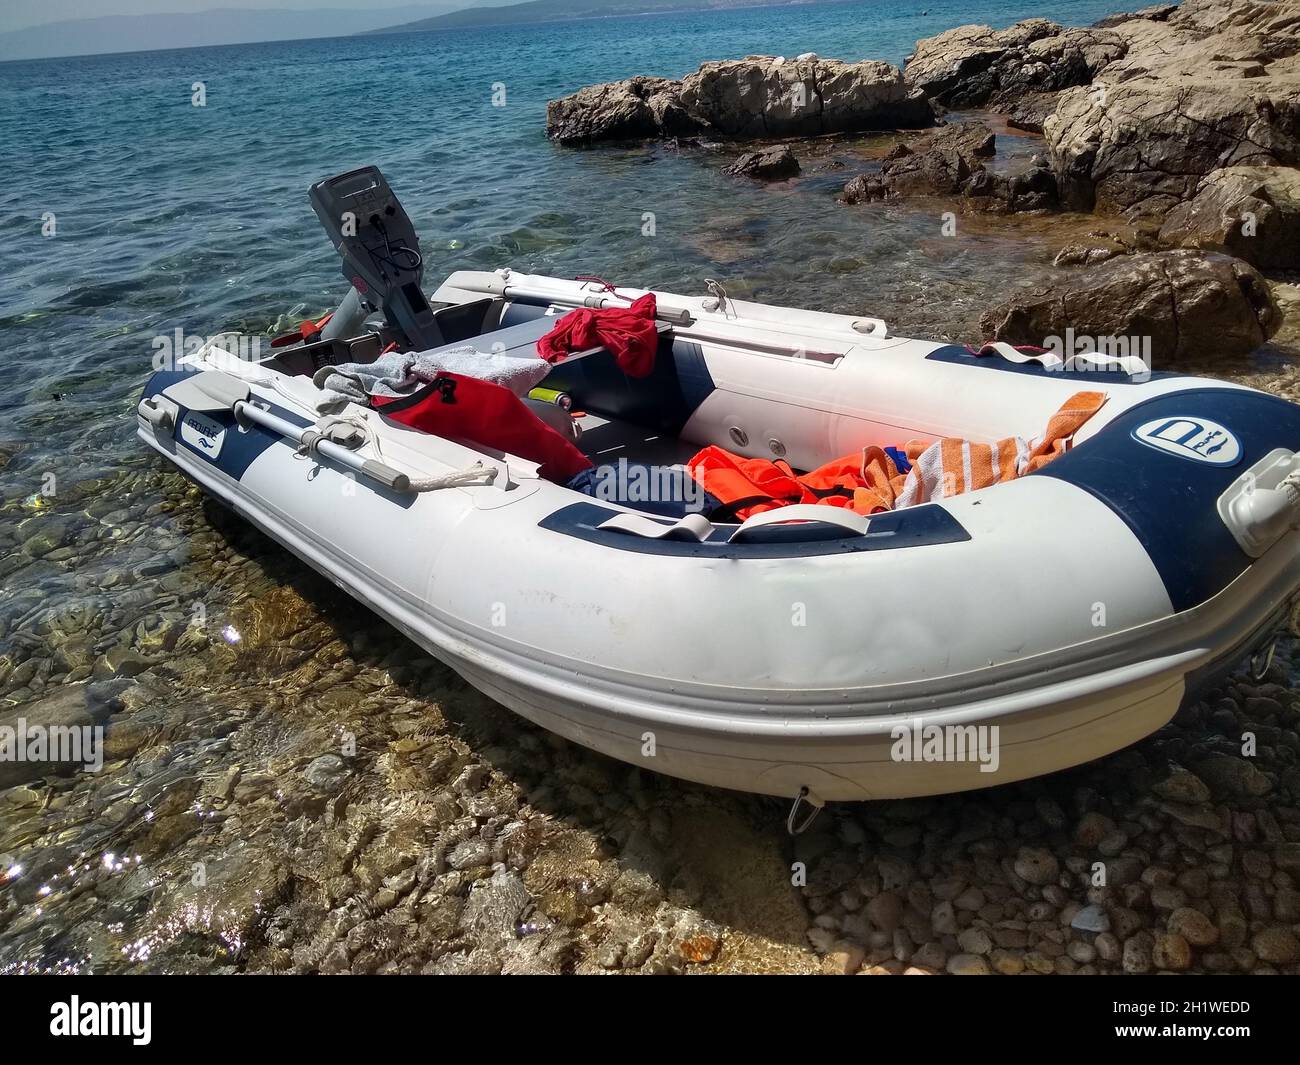 Schlauchboot Meer High Resolution Stock Photography and Images - Alamy